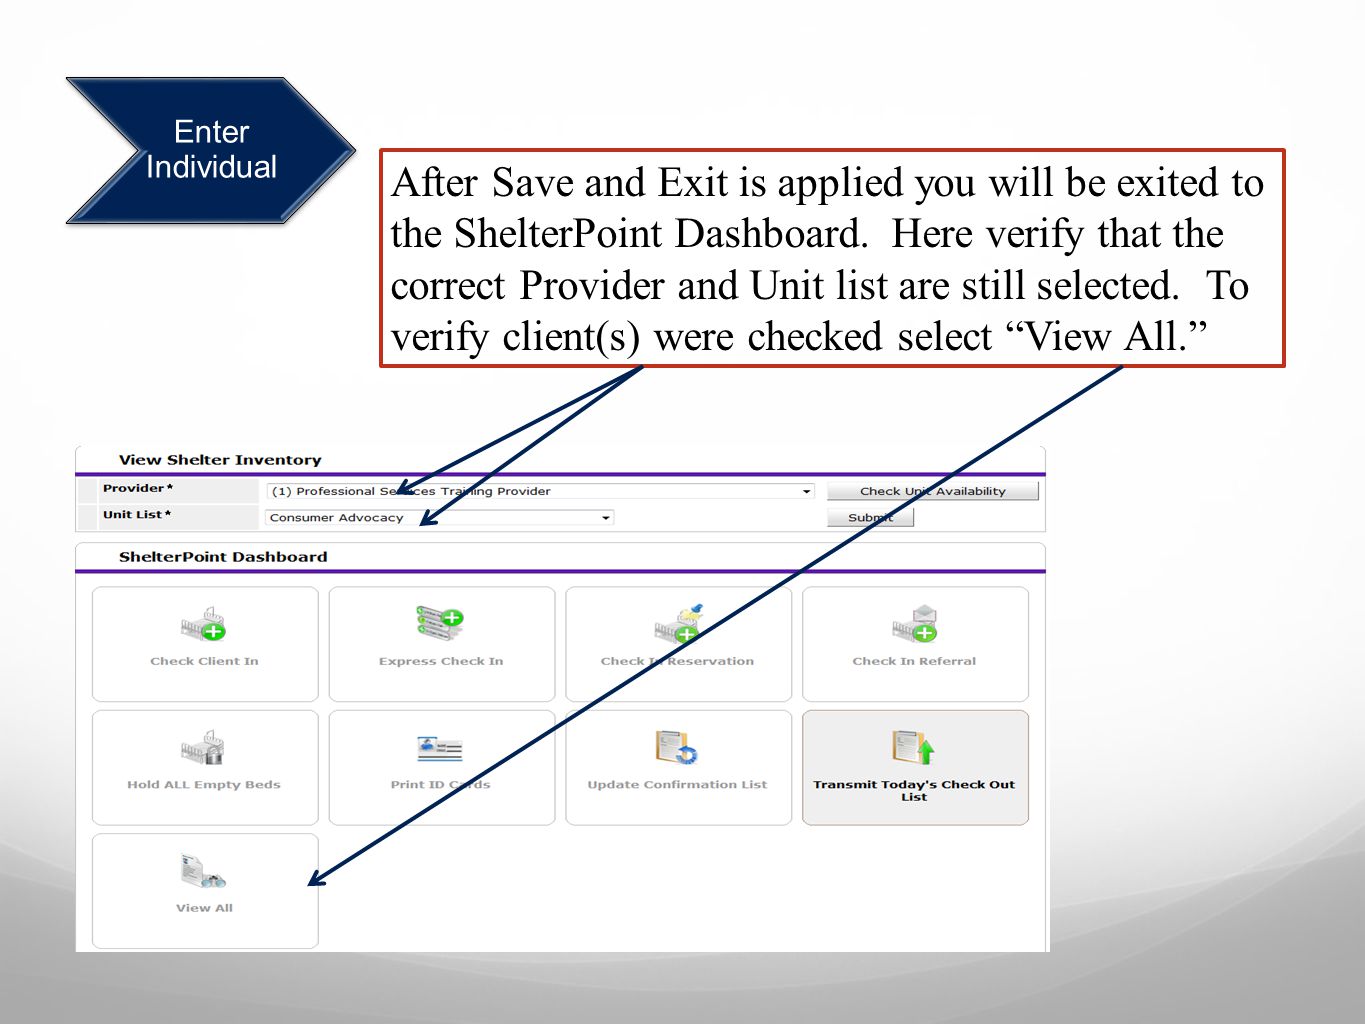 Enter Individual After Save and Exit is applied you will be exited to the ShelterPoint Dashboard.